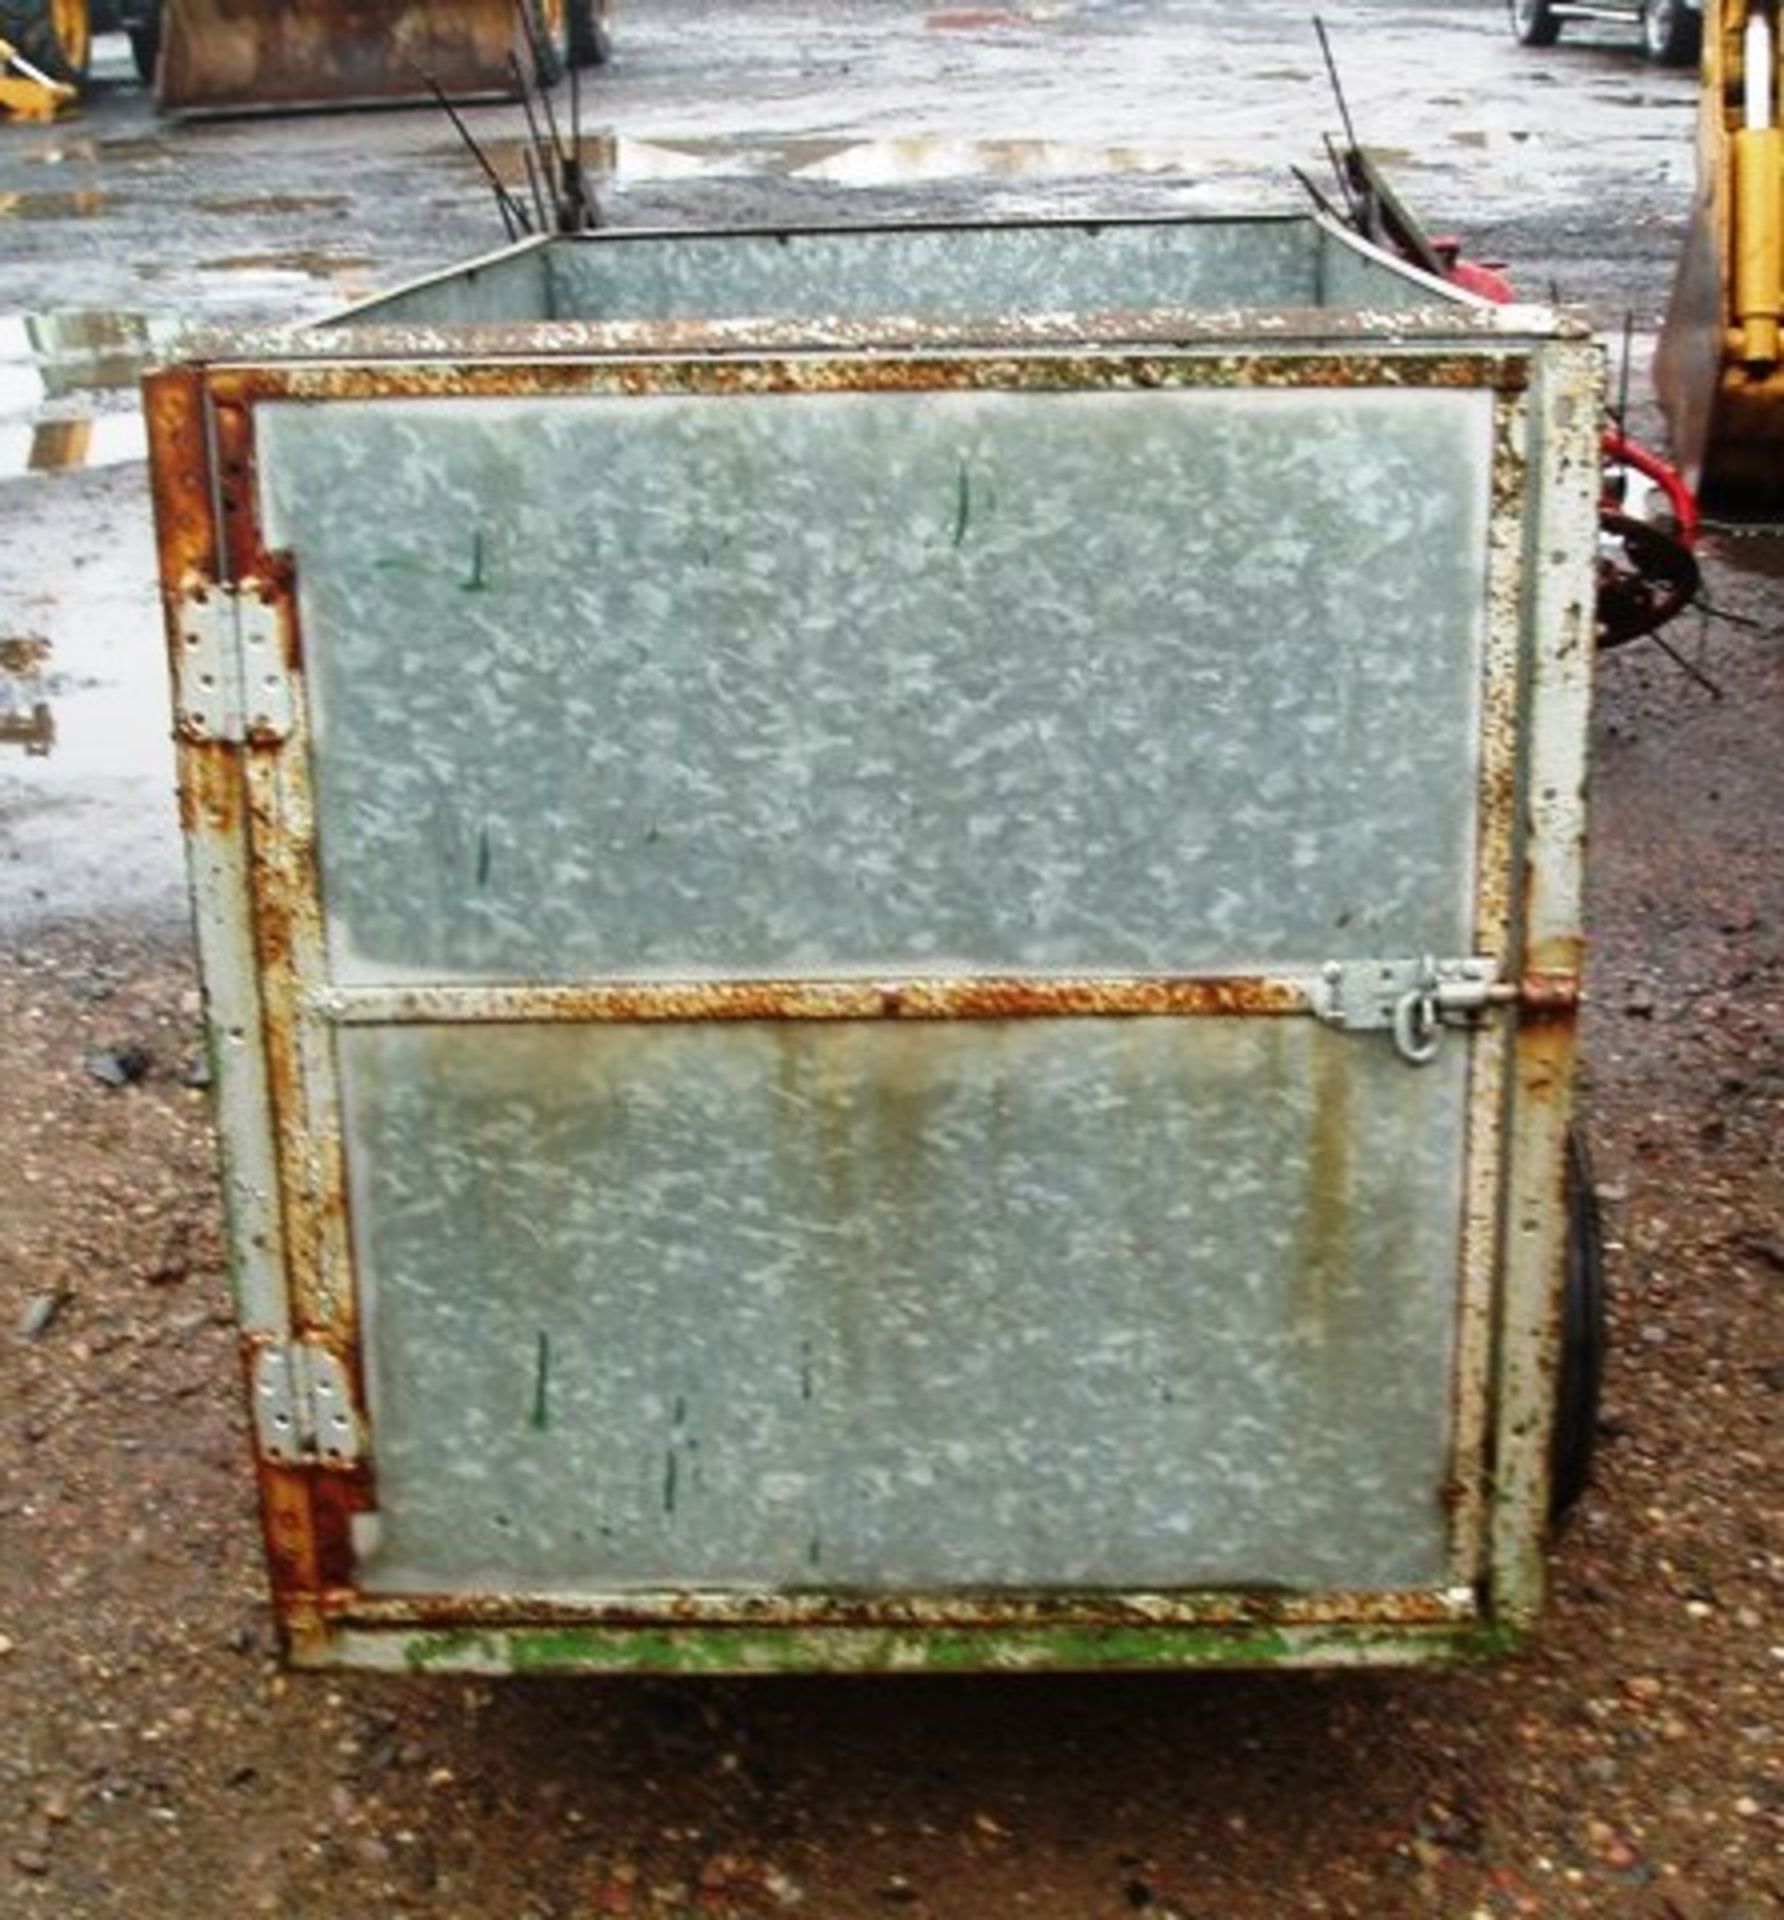 SMALL LIVESTOCK TRAILER WITH OPENING REAR DOOR, APPROX 6' X 3' 6" WITH HIGH ALUMINIUM SIDES.' - Image 2 of 2